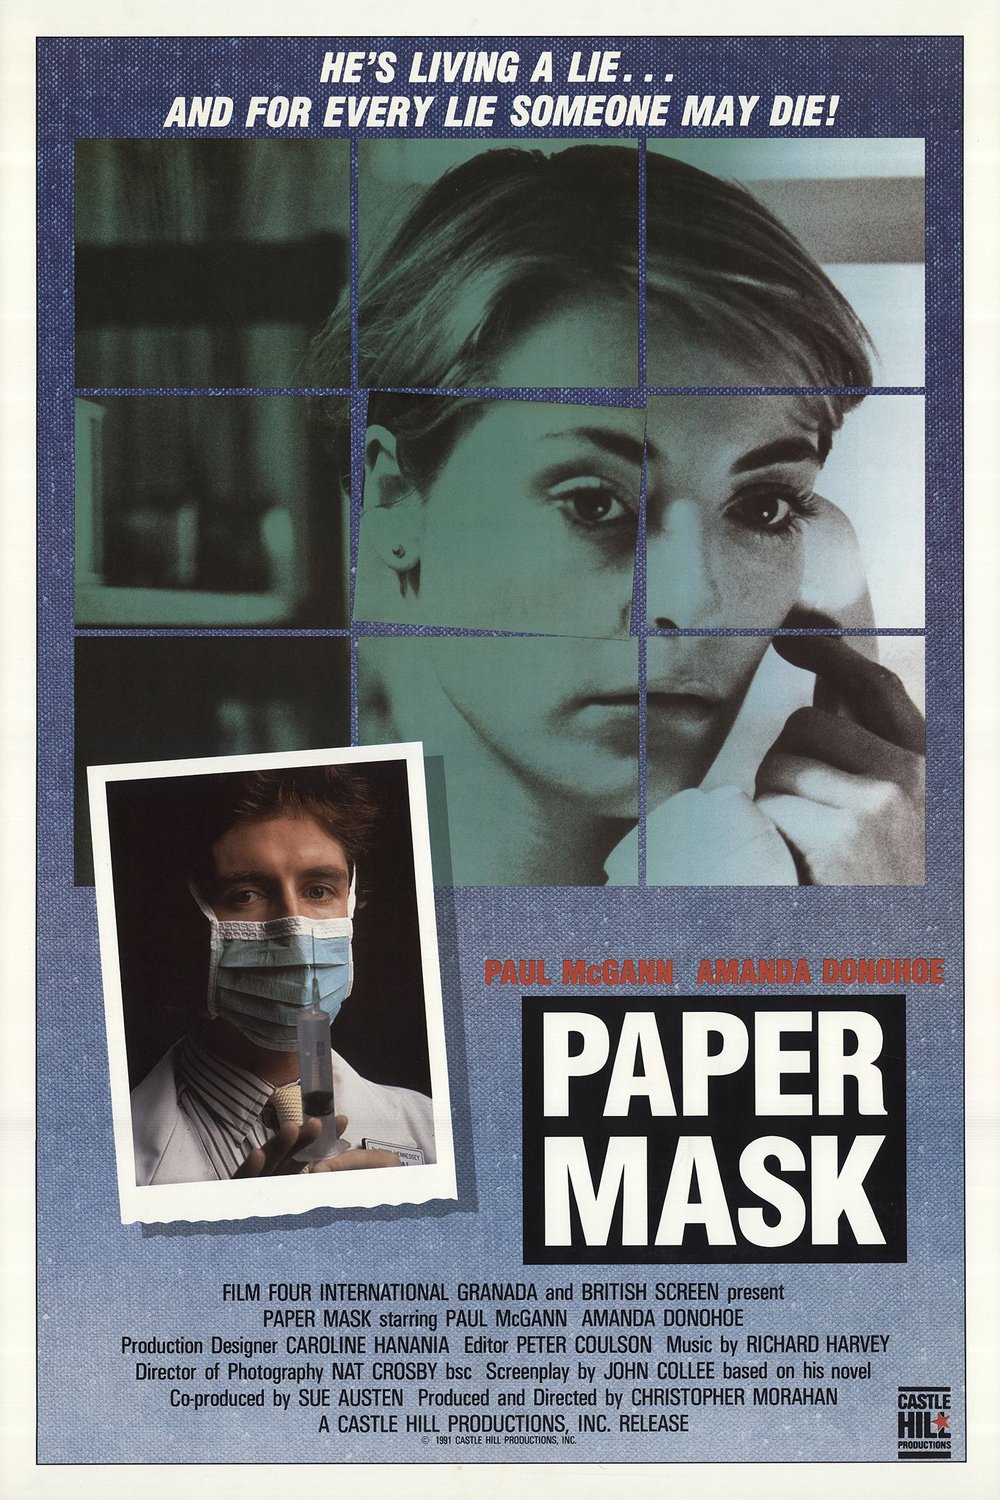 Poster of the movie Paper Mask